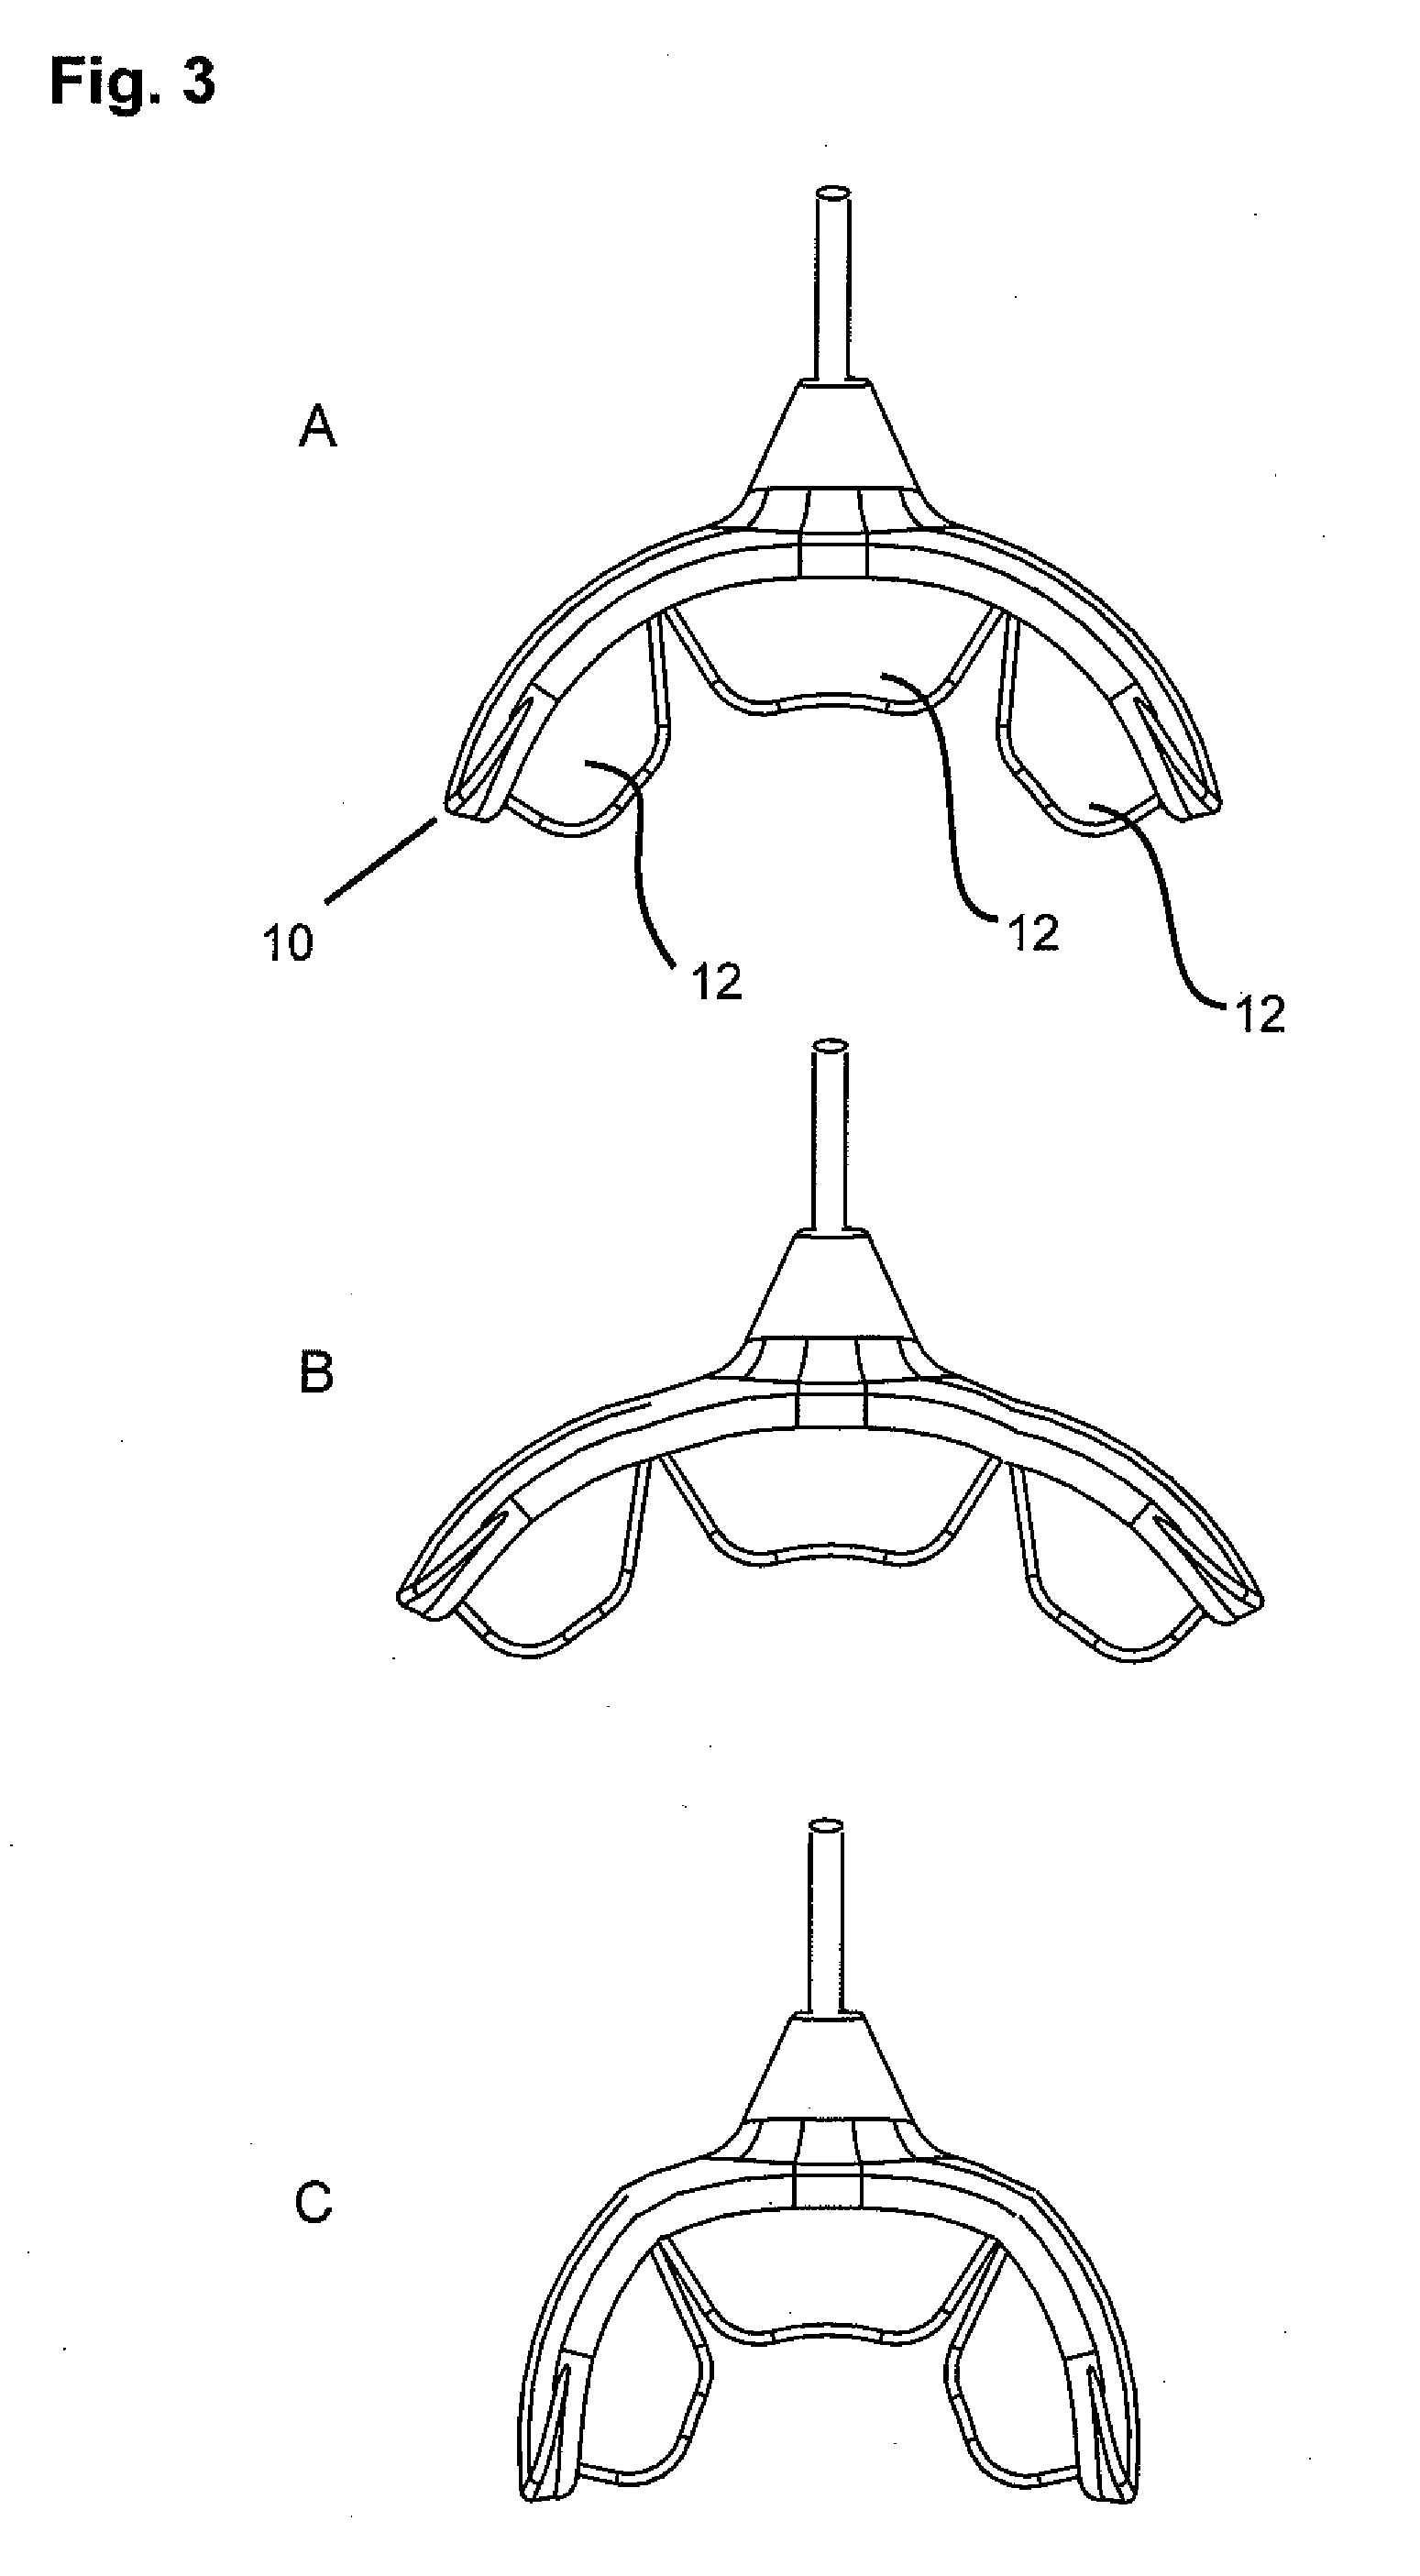 Mouthpiece that adjusts to user arch sizes and seals from oxygen exposure